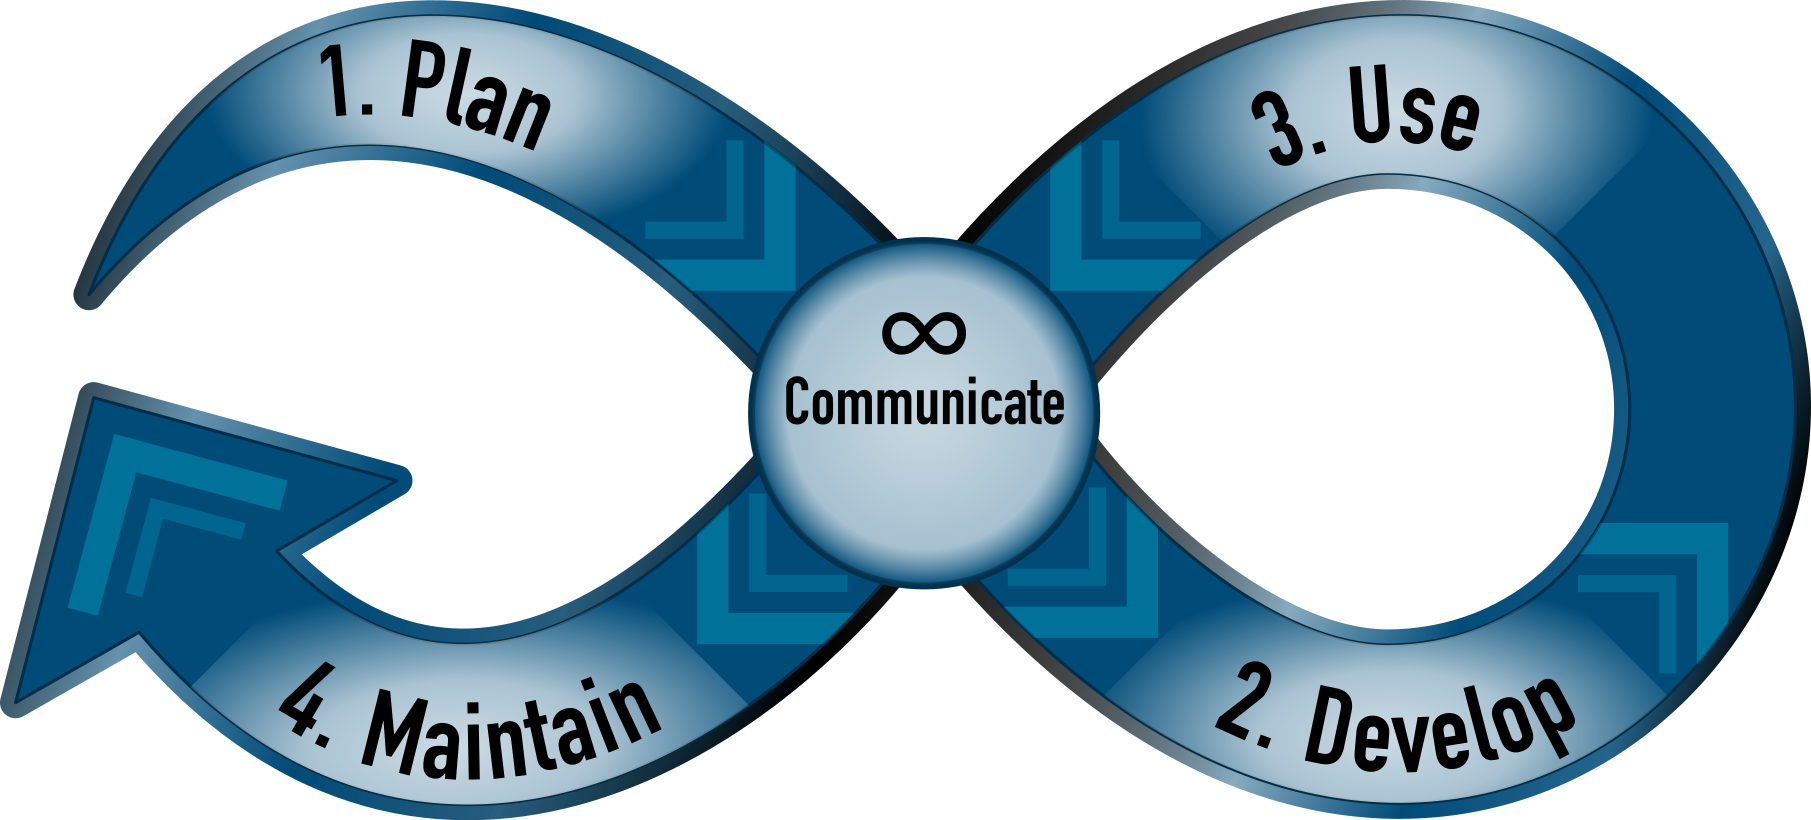 Depicts the four phases of the Community Profile Lifecycle: Plan, Develop, Use, and Maintain, each involving continuous Communication.